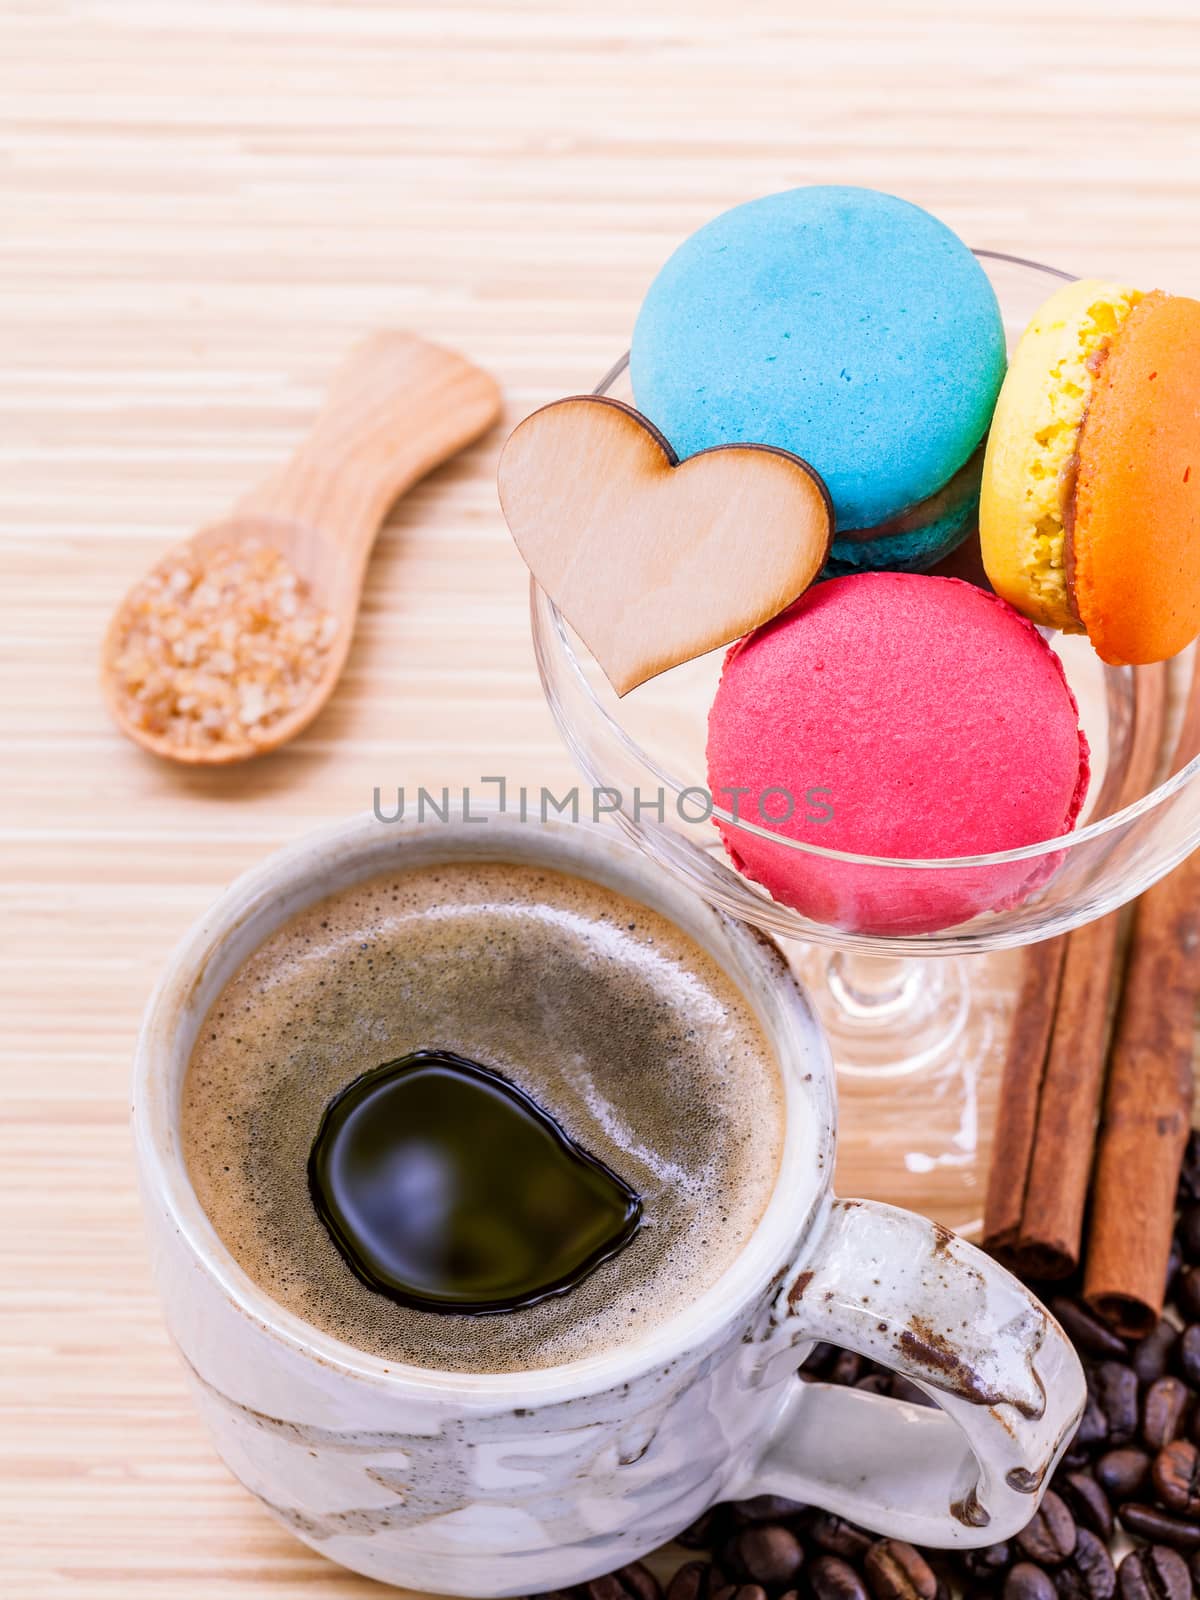 French colourful macaroons and a cup of coffee. - Macro shot with copy space.